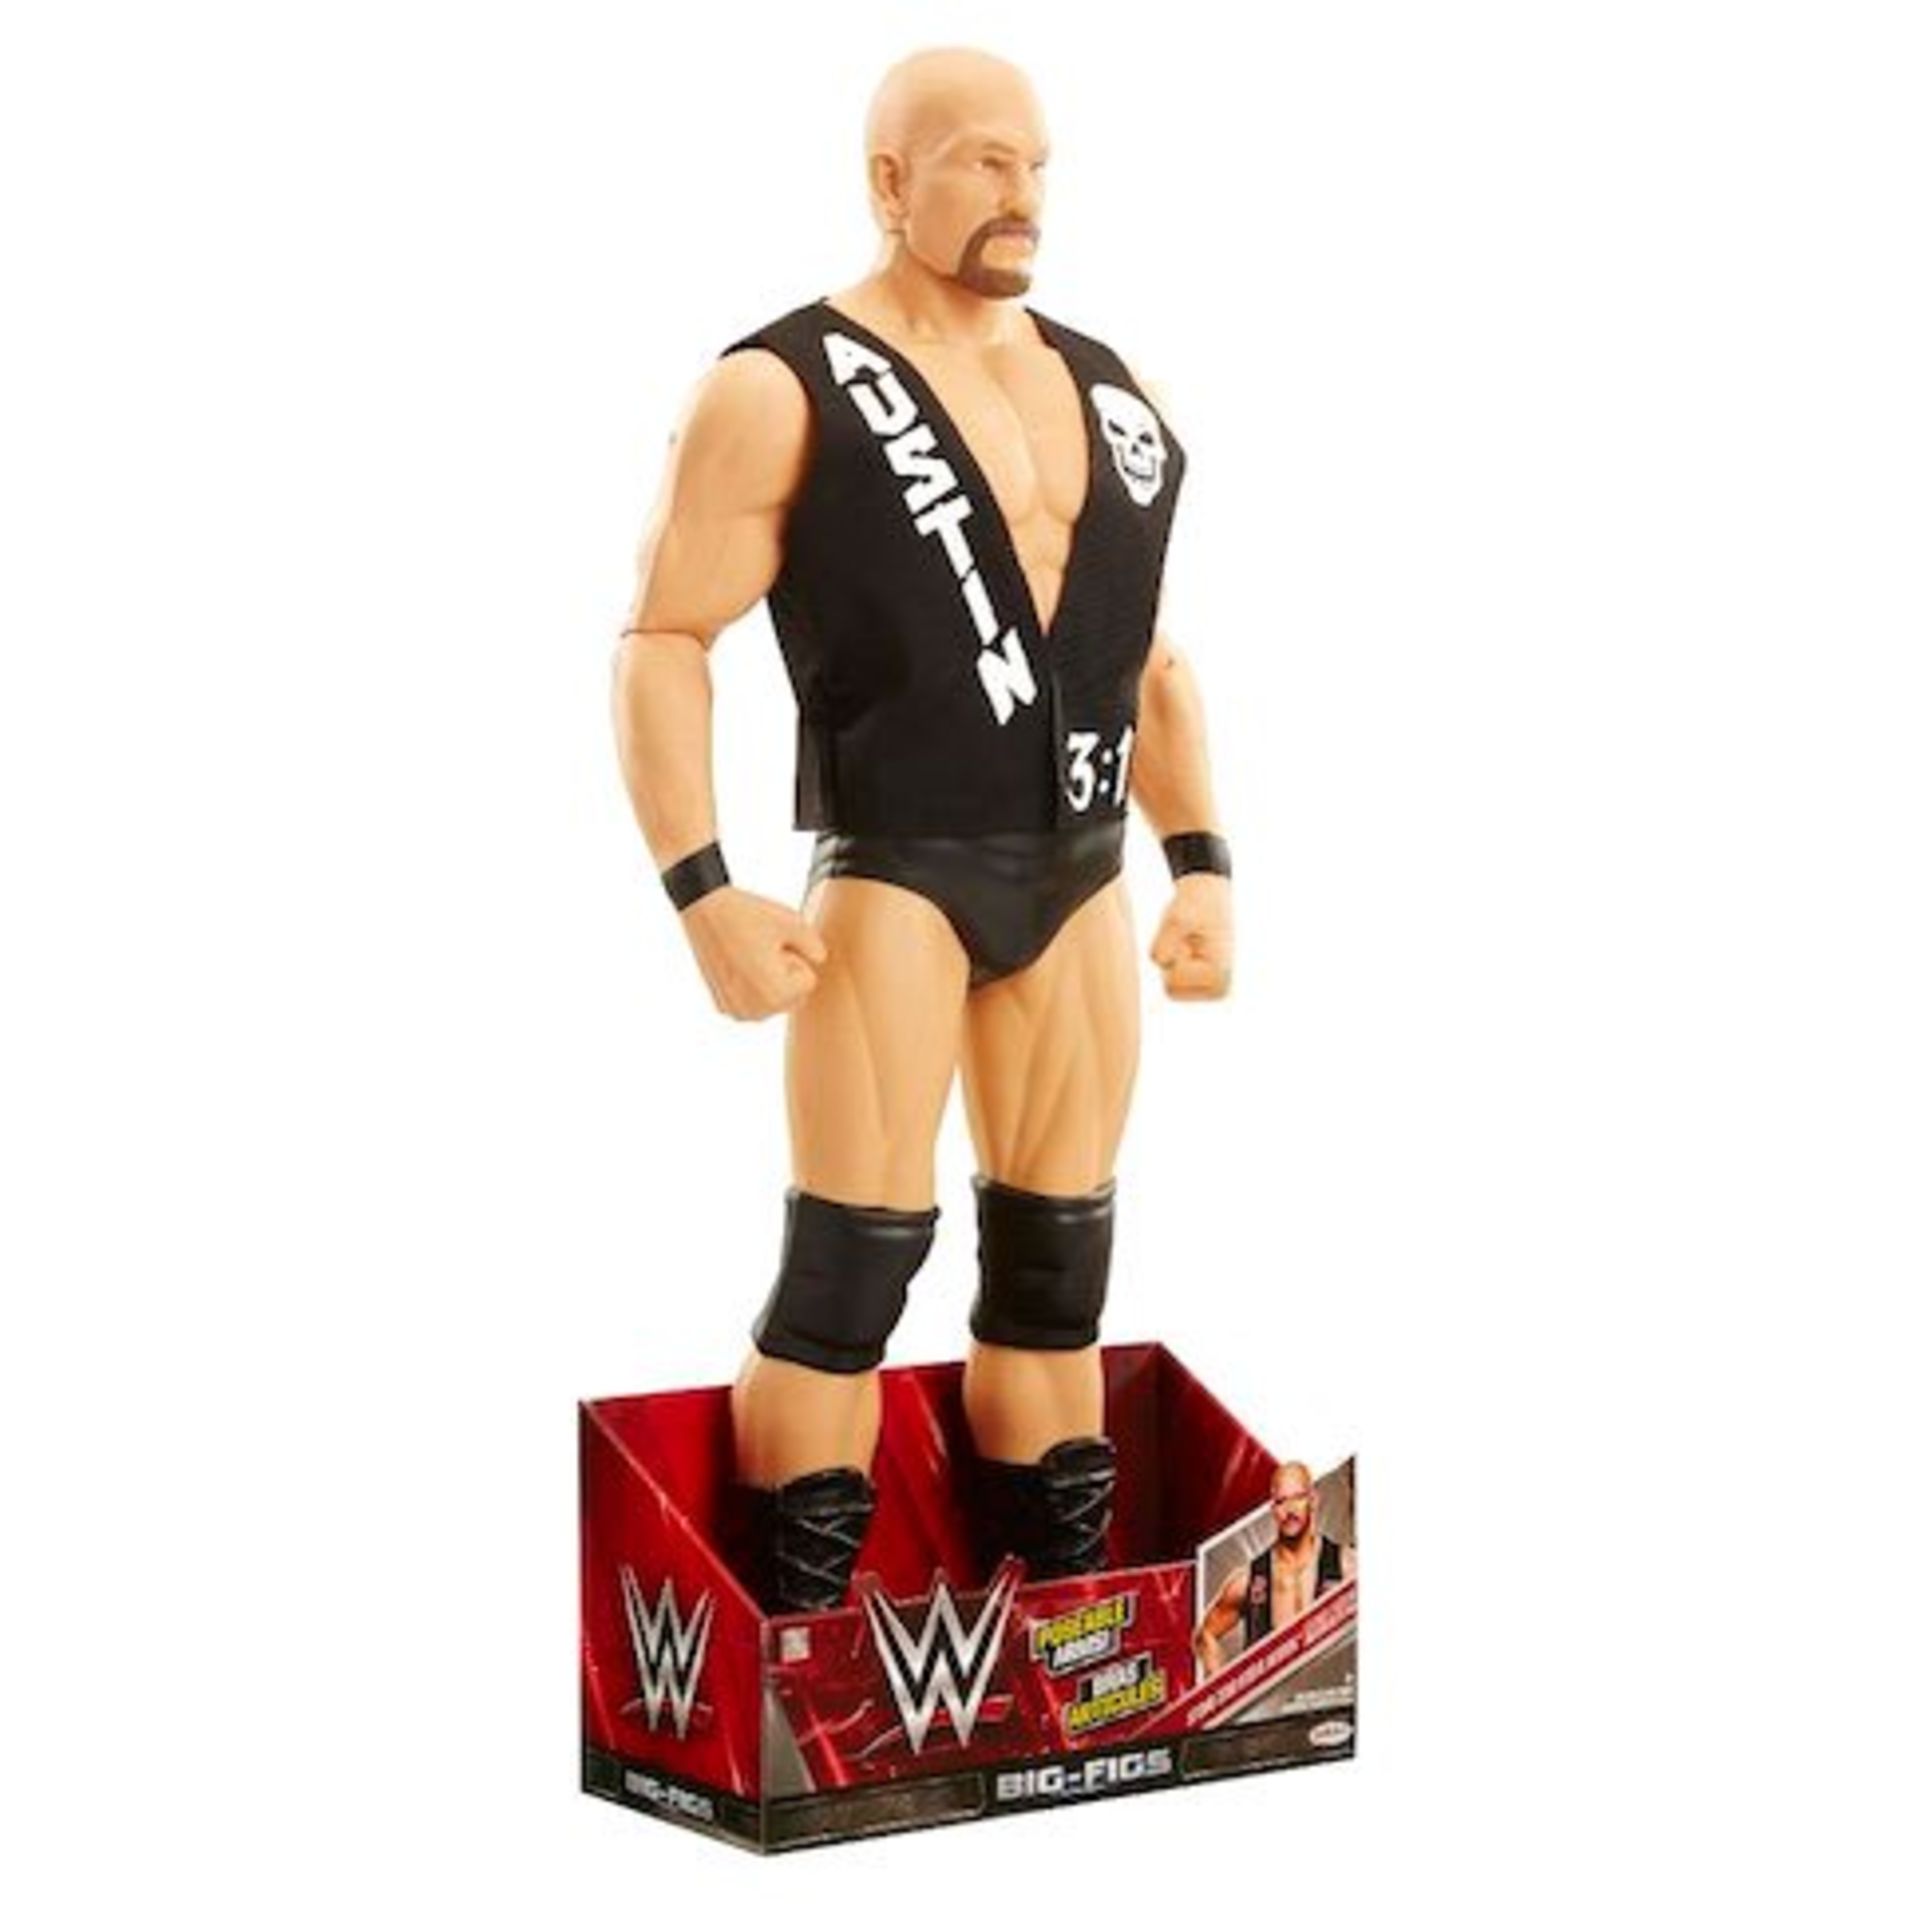 V Brand New Massive 31" WWE Stone Cold Steve Austin Action Figures - 3count.co.uk Price £28.99 - 8 - Image 3 of 8